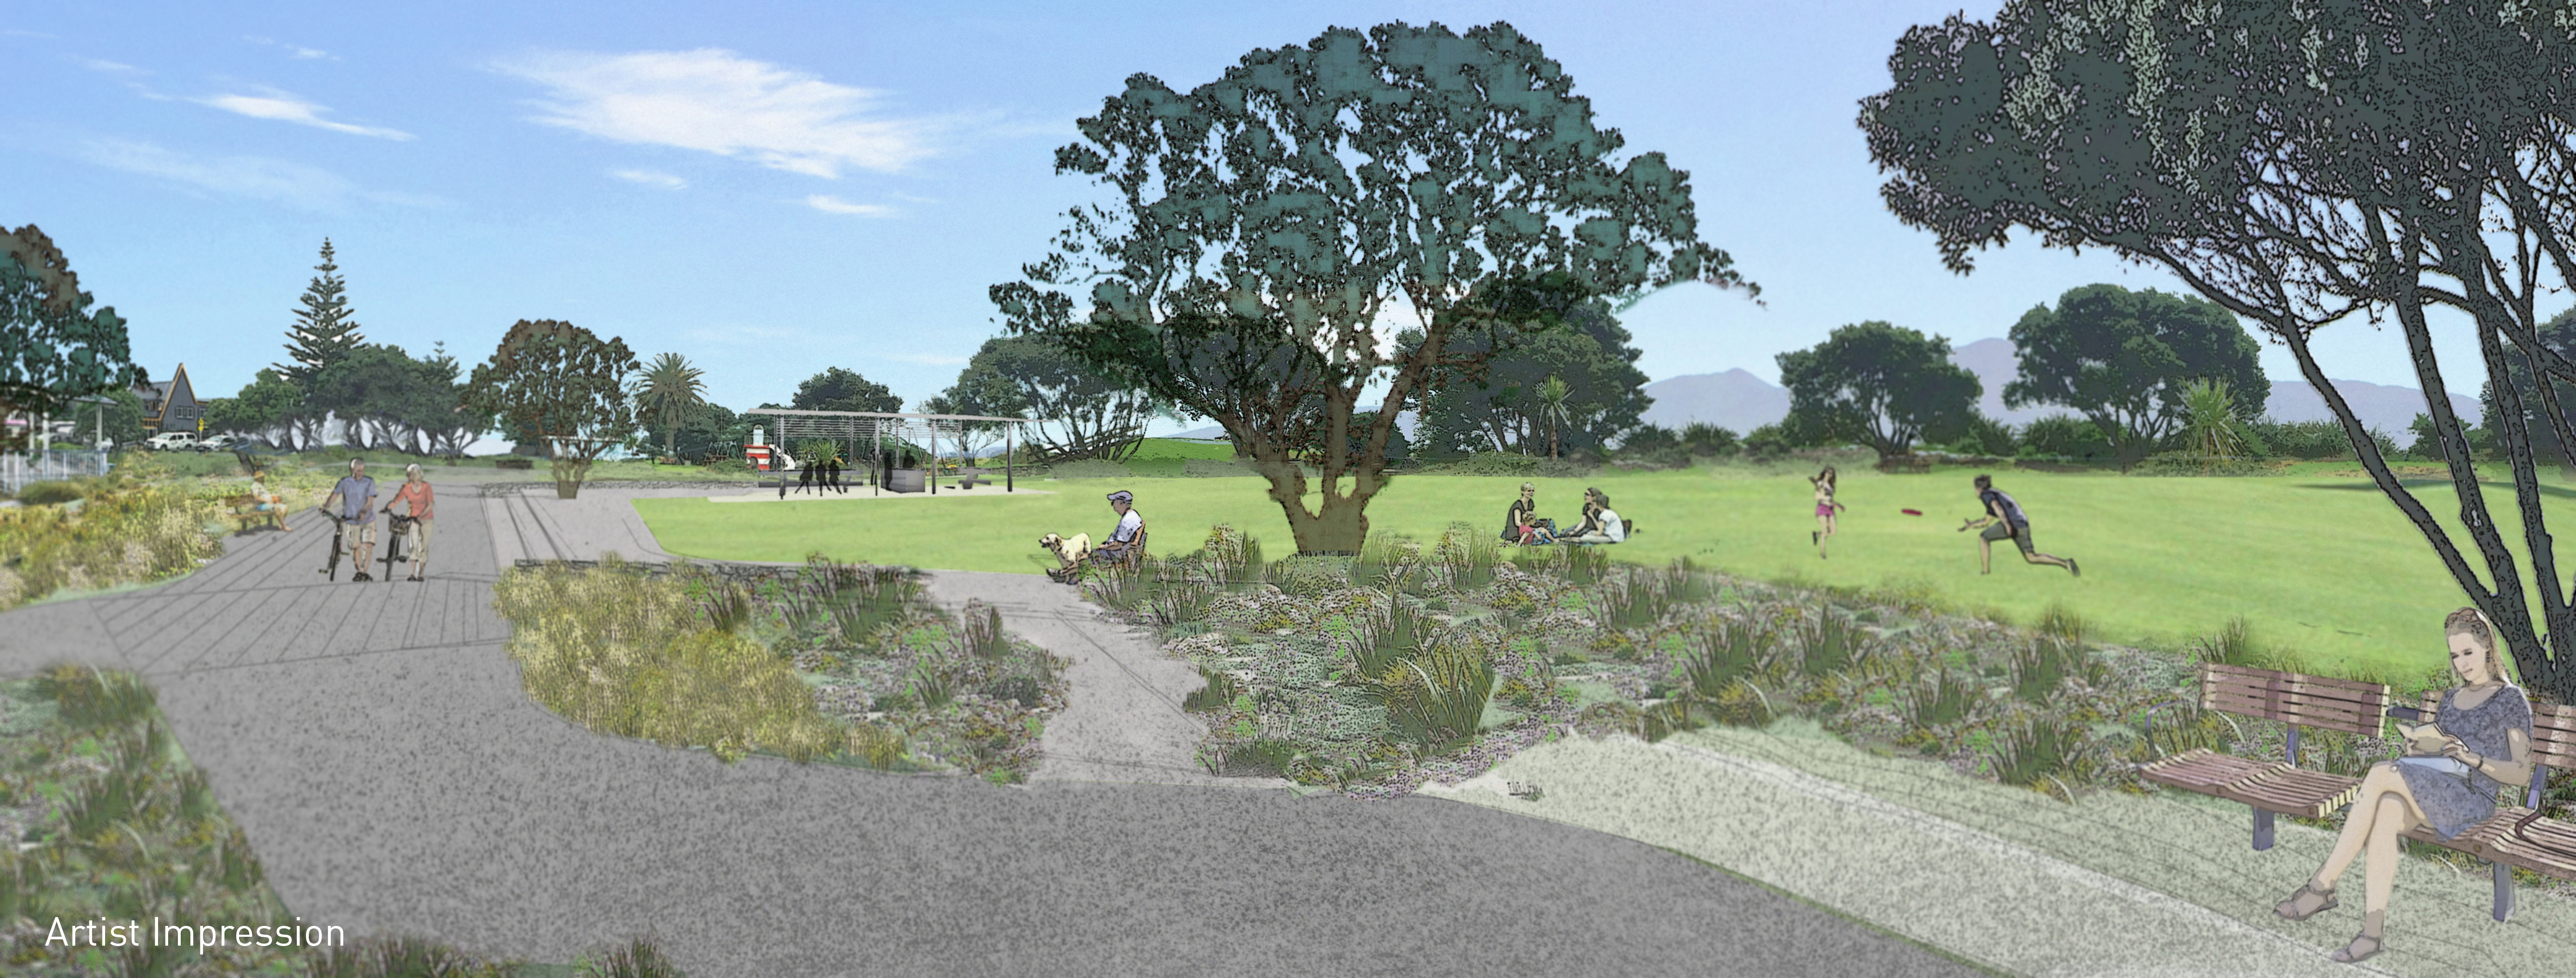 Artists impression of Maclean Park redevelopment looking south